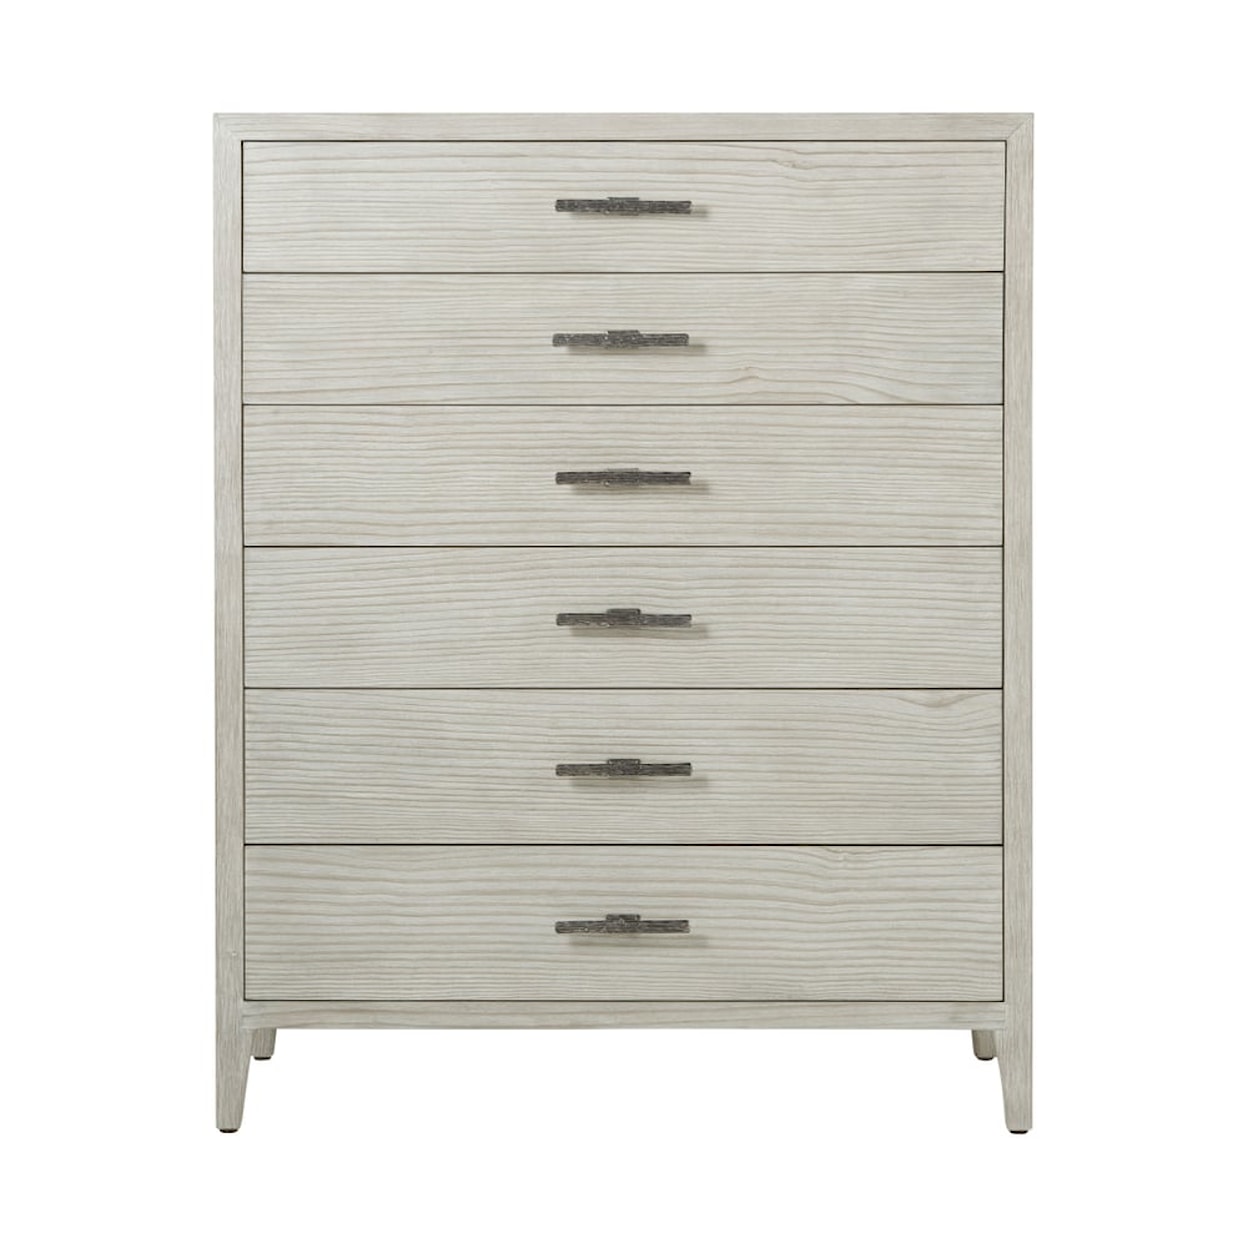 Theodore Alexander Breeze 6-Drawer Tall Bedroom Chest